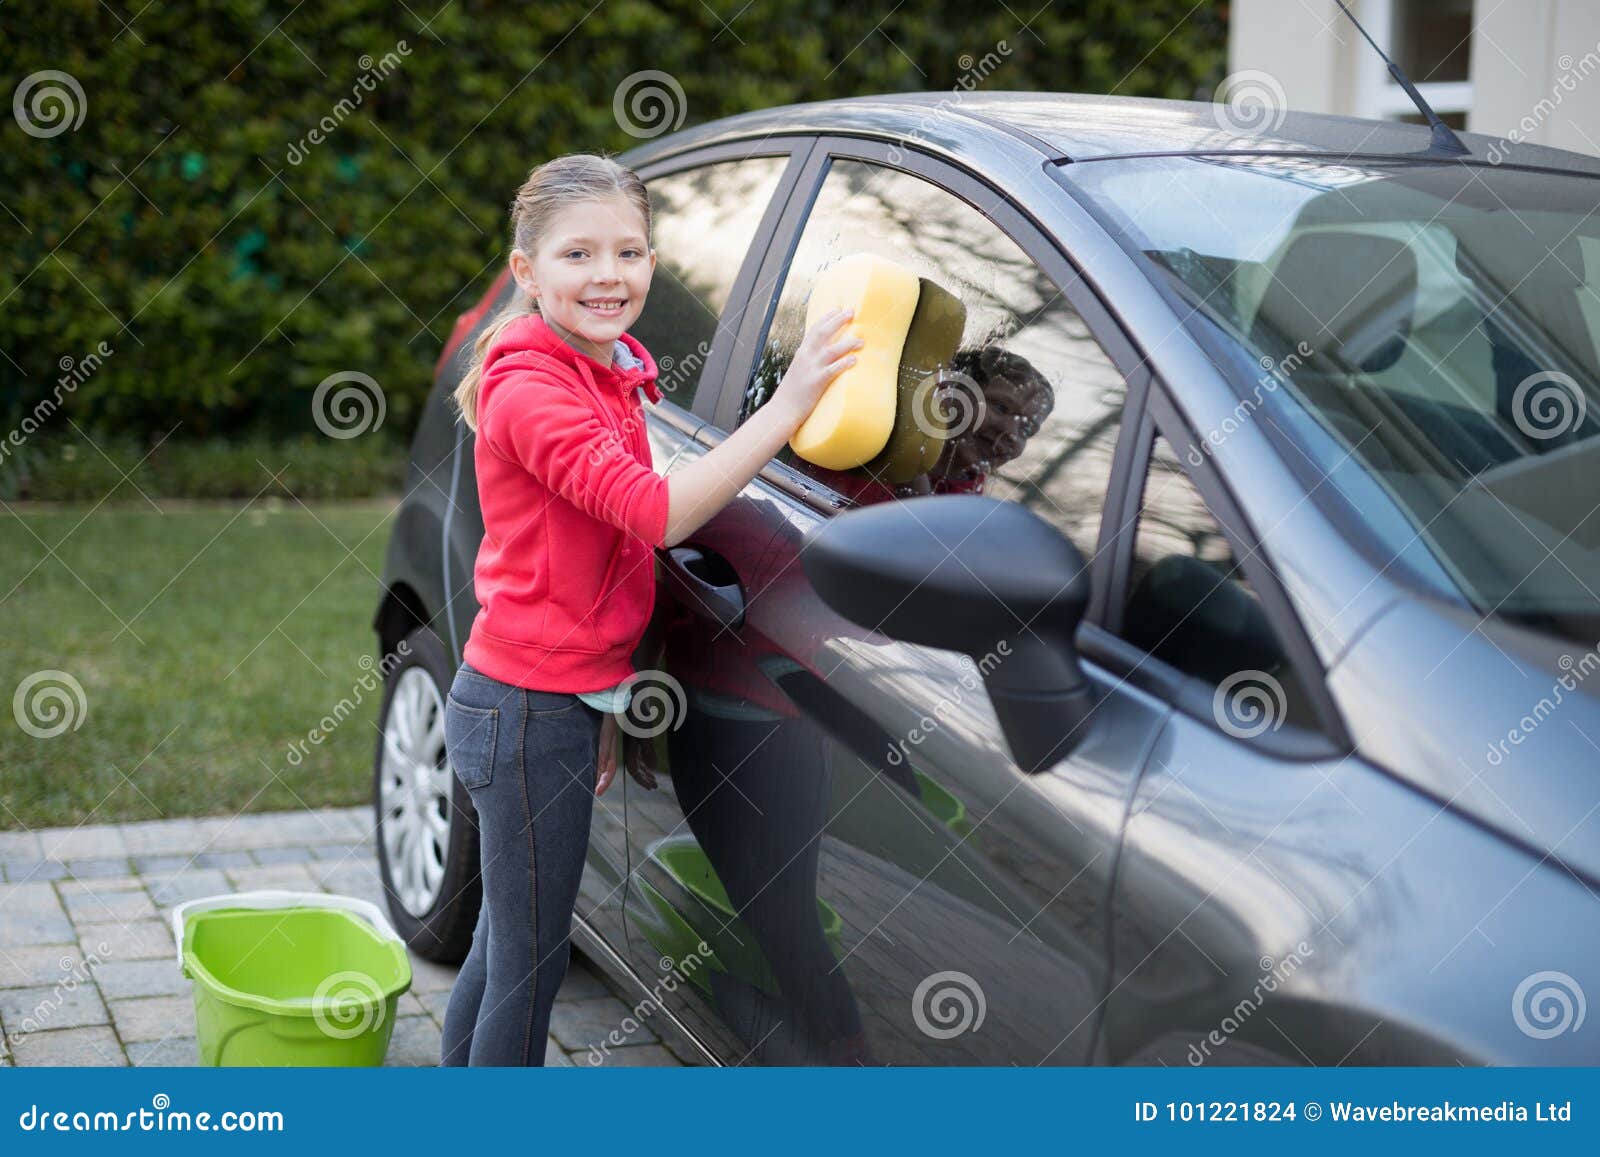 Teenage Girl Washing A Car On A Sunny Day Stock Photo Image Of